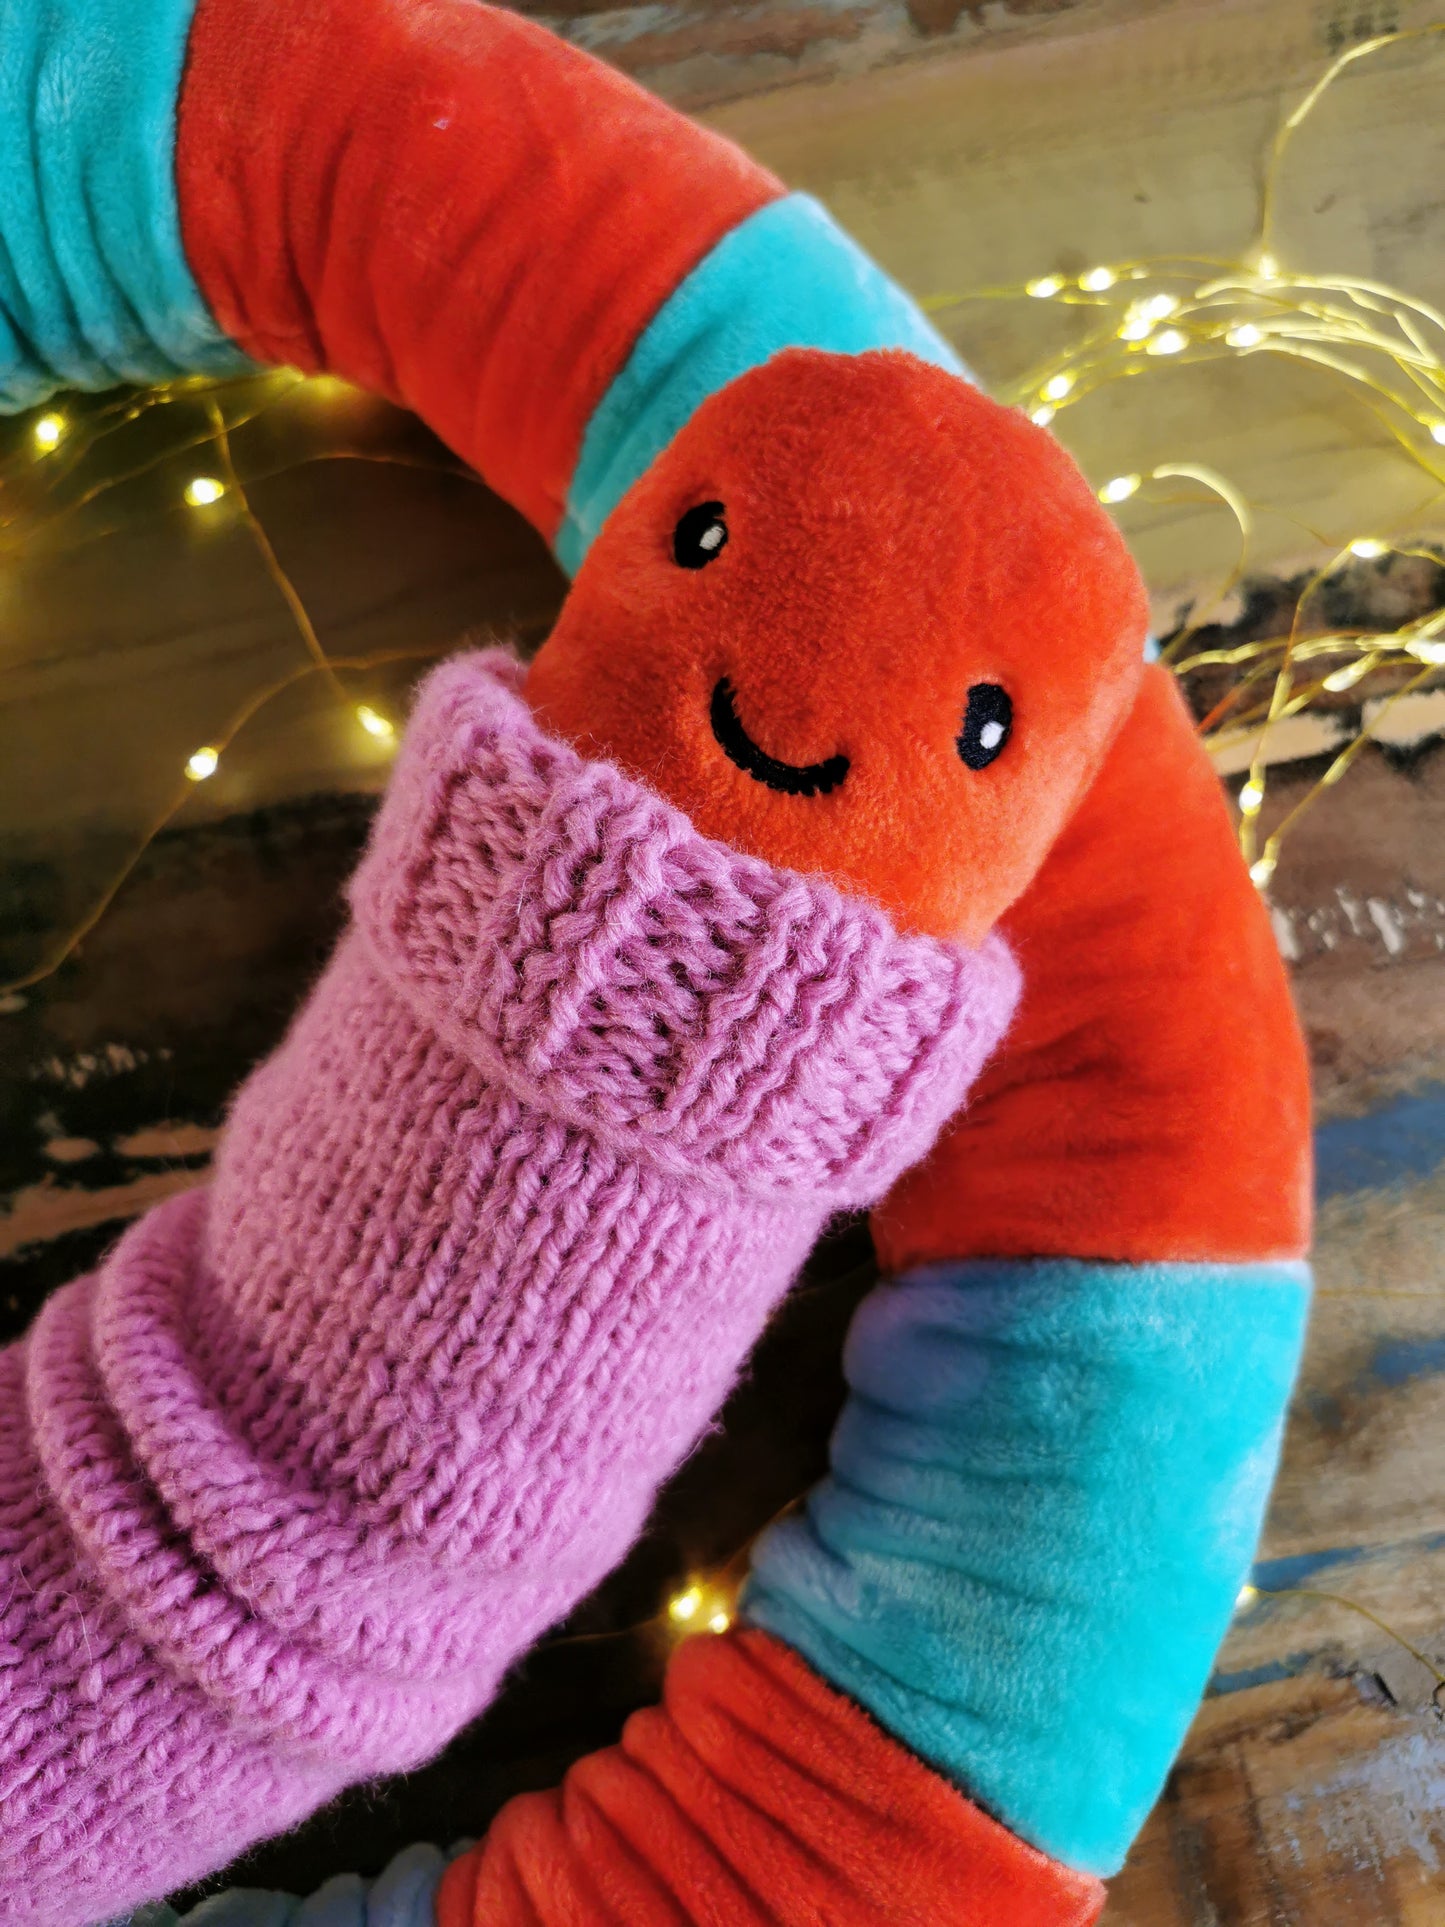 Giant Worm Plush with knitted turtleneck, funny odd creature, Mandarine/Teal Plush, 200cm